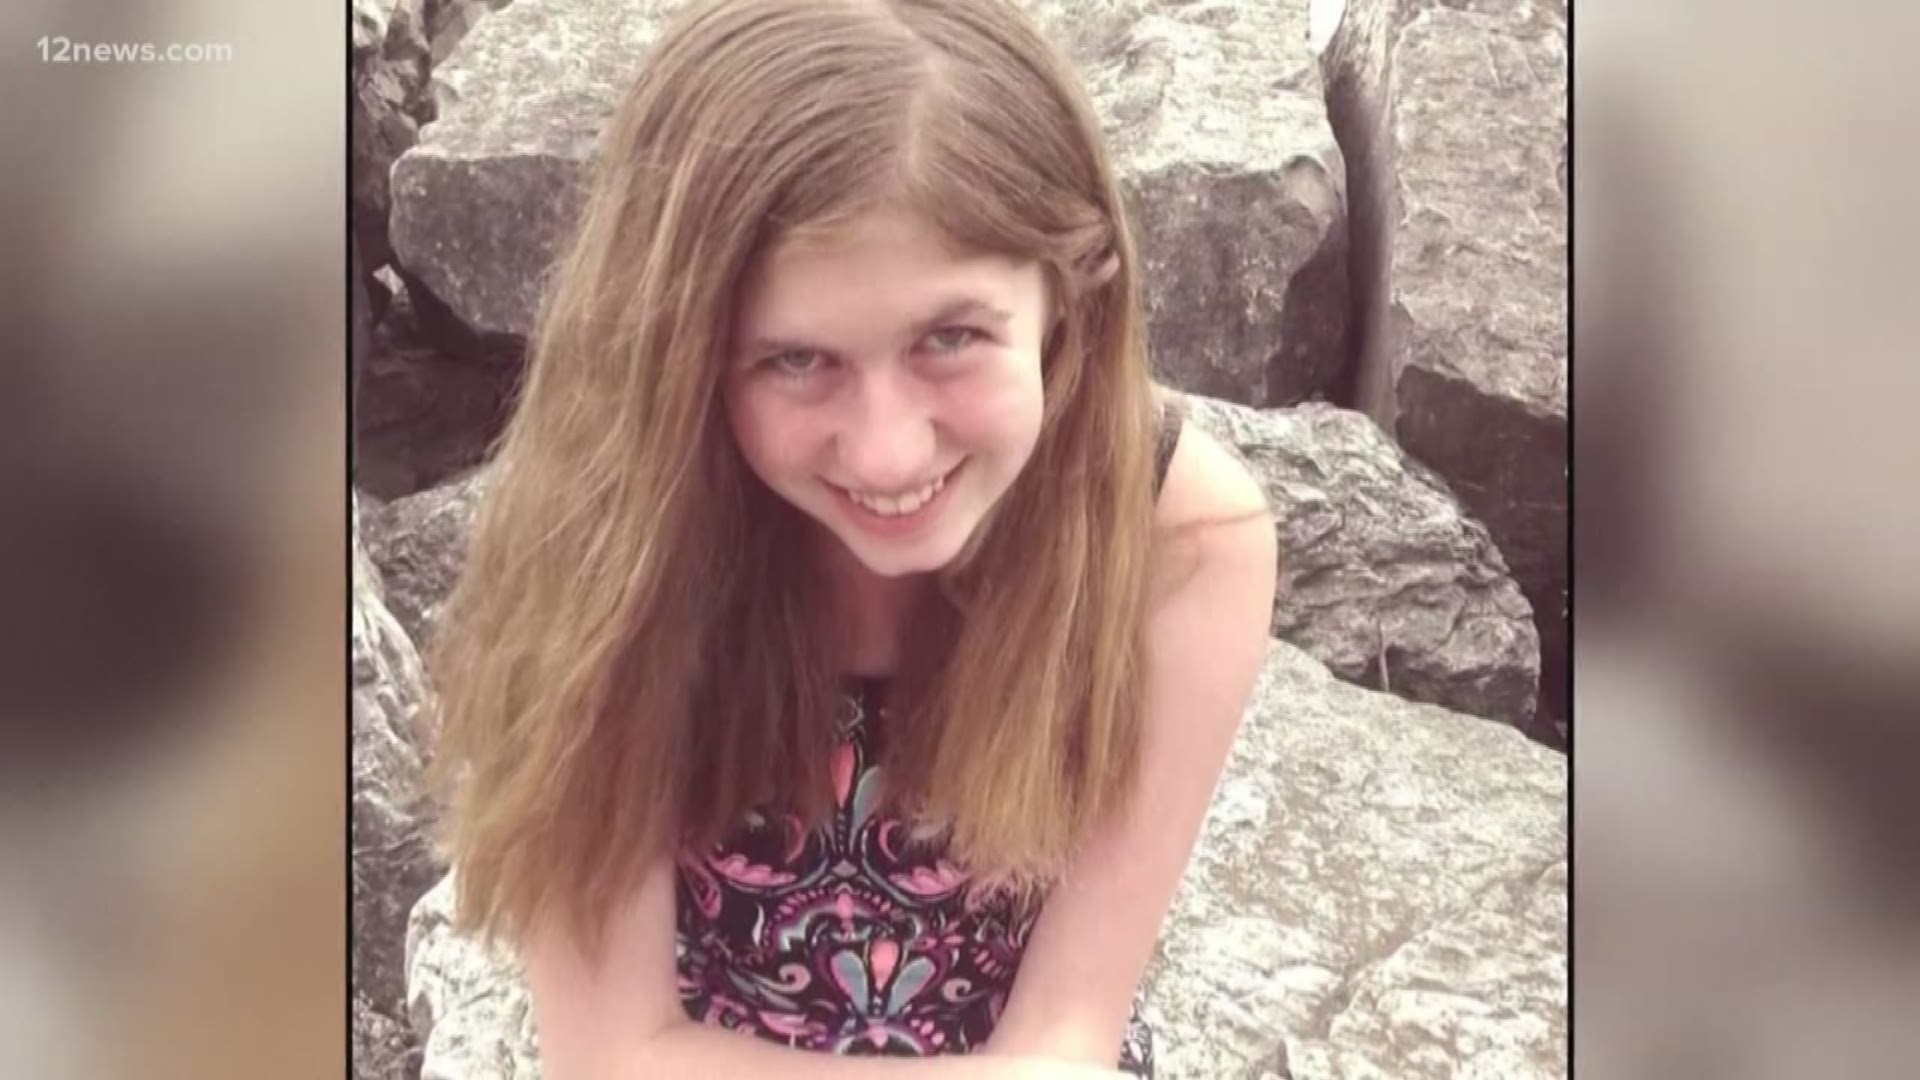 Jayme Closs went missing from her home in Wisconsin after her parents were murdered in their home. Jayme was found an hour north of her home town. A suspect is in custody.